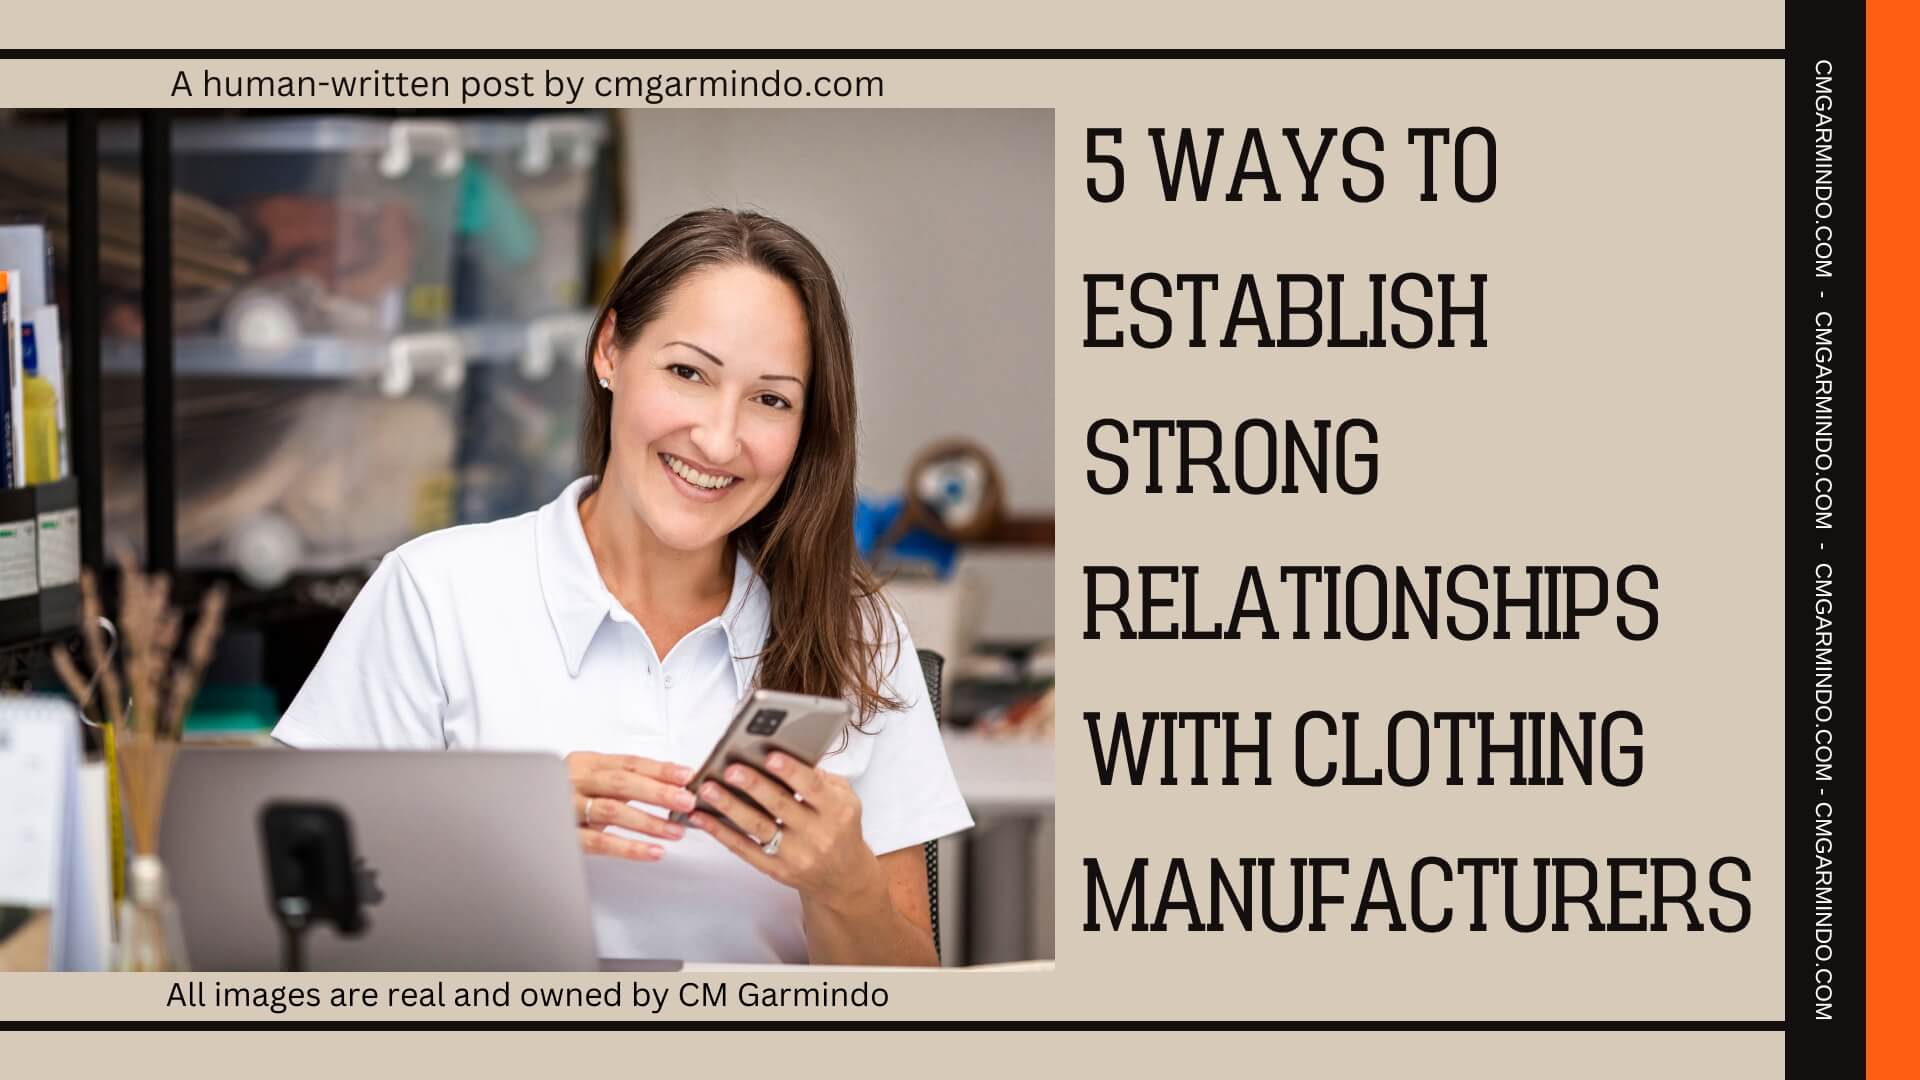 Learning to establish strong relationships with clothing manufacturers to grow your fashion brand